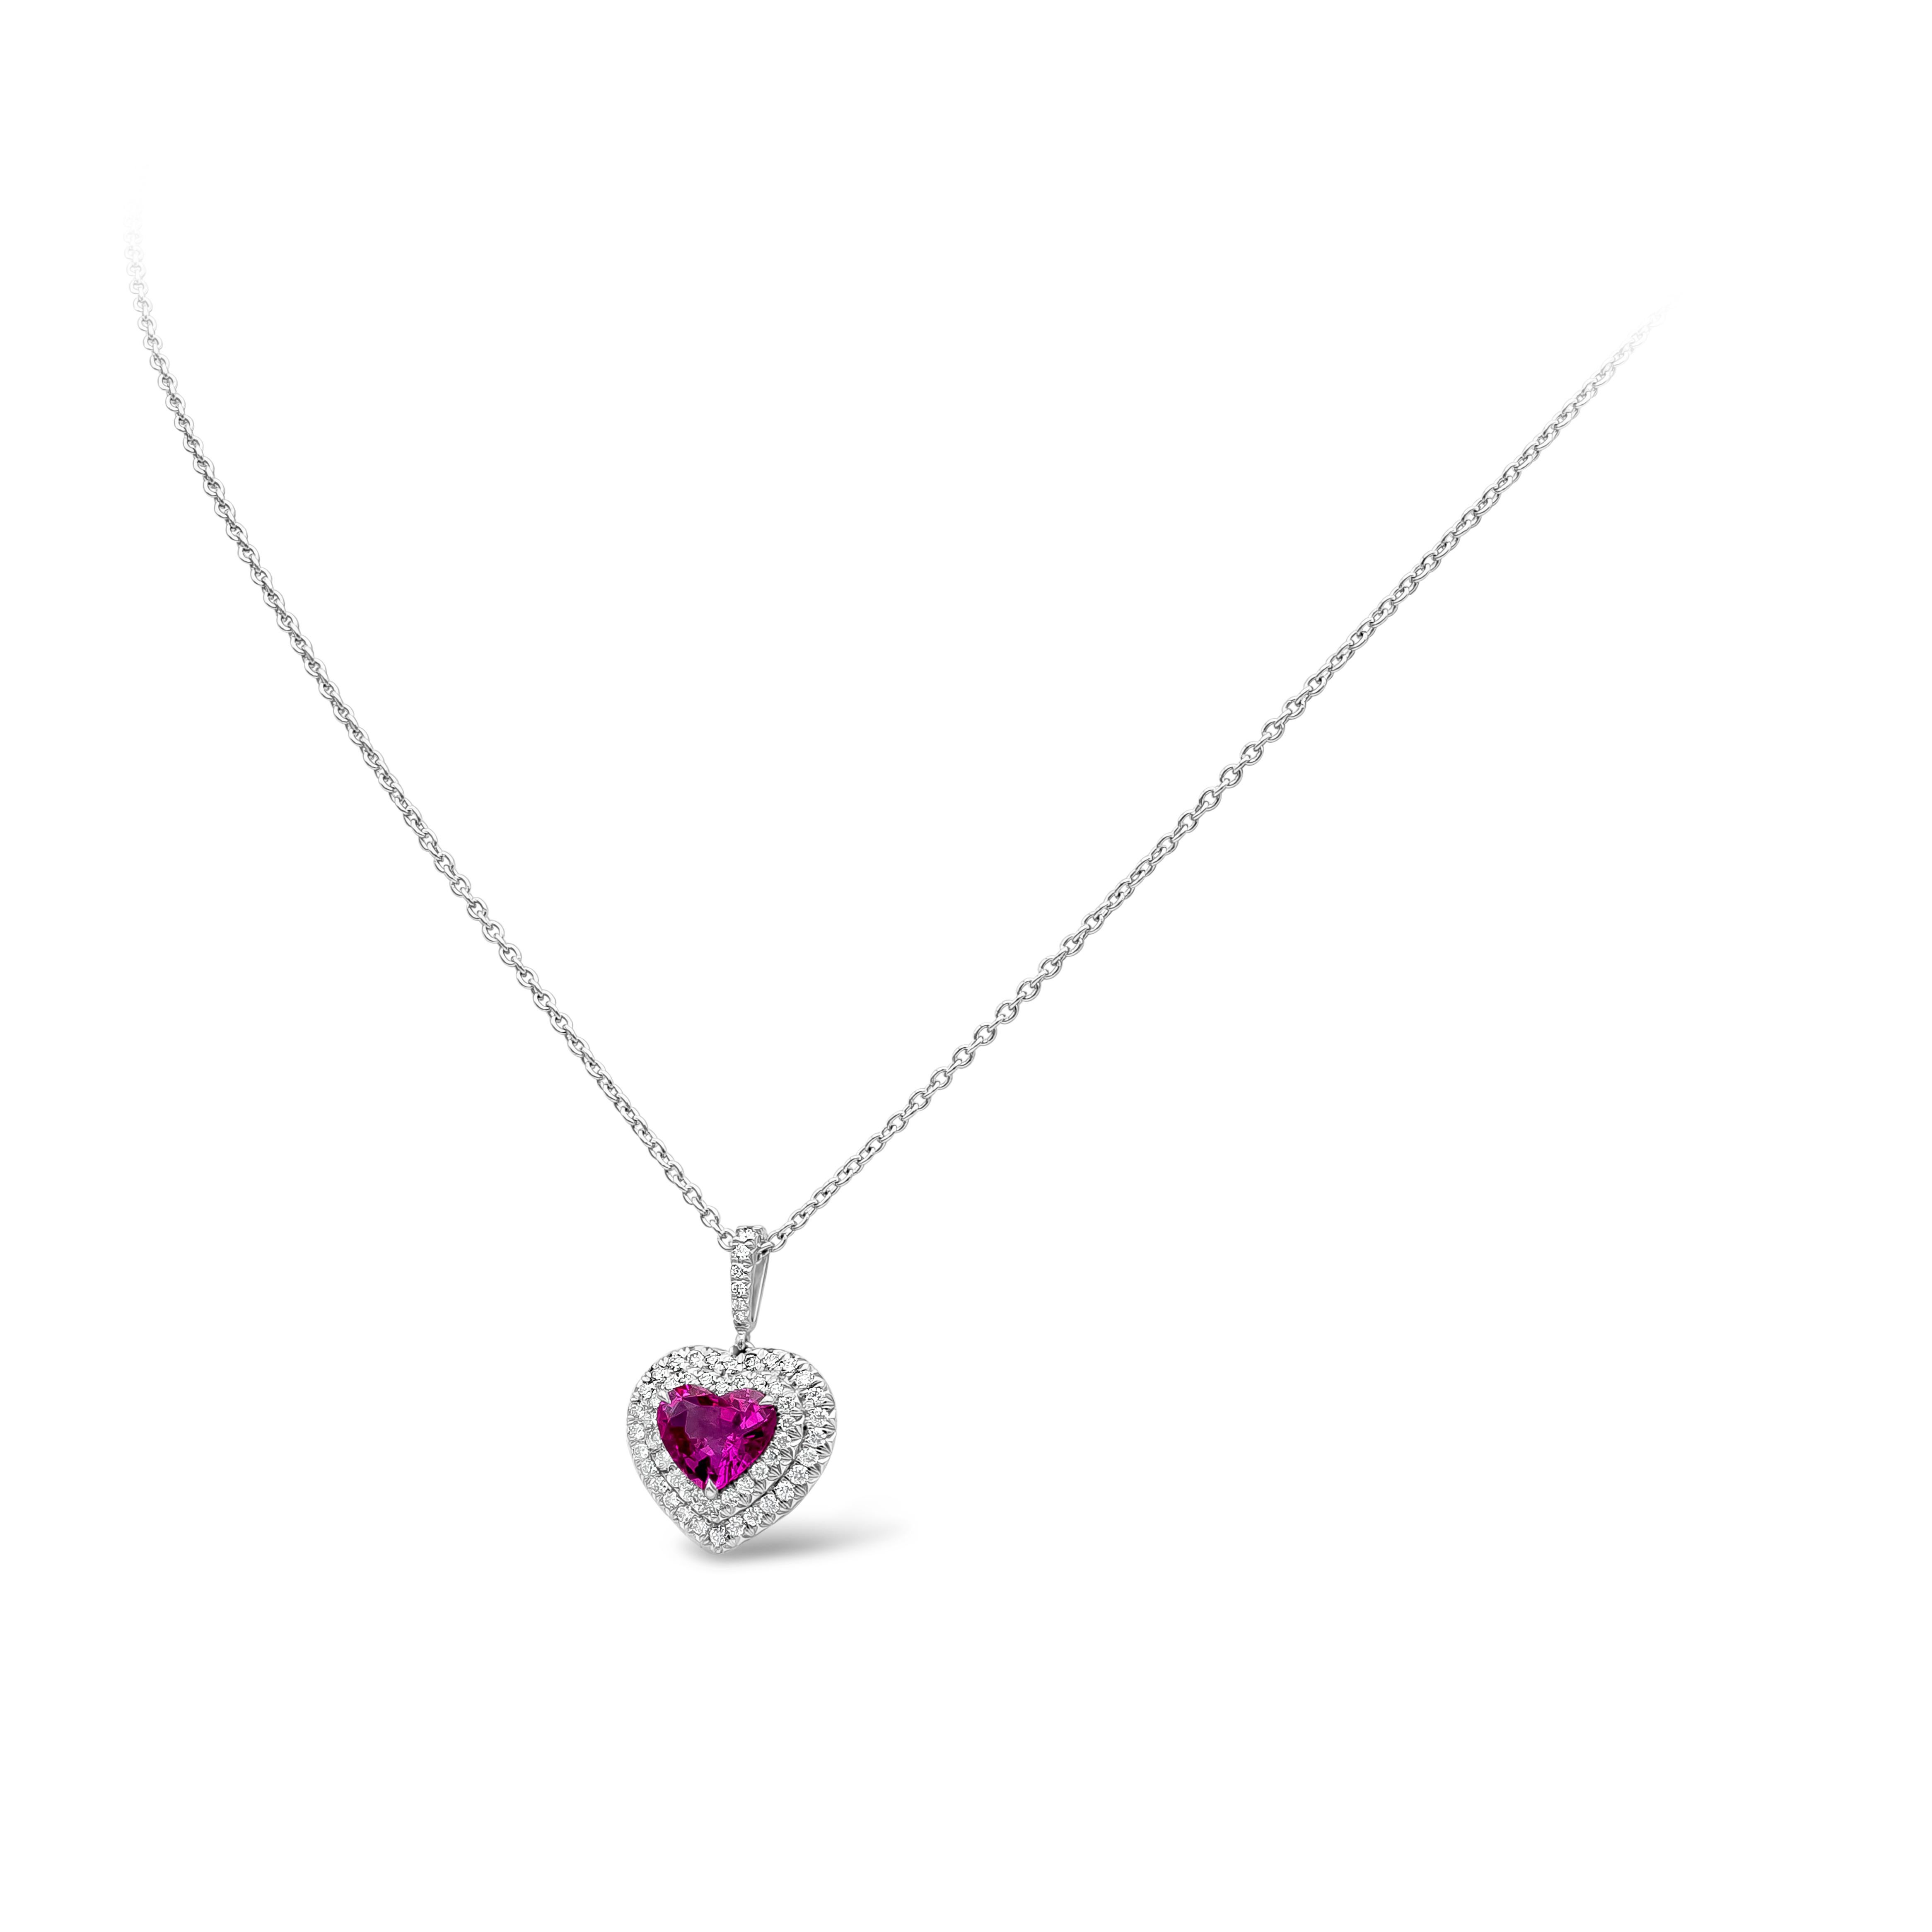 A beautiful and versatile pendant necklace showcasing a vibrant 1.82 carat heart shape pink sapphire certified by GIA as having no indications of heat treatment. Center stone is surrounded by two rows of round brilliant diamonds that weighs 0.49